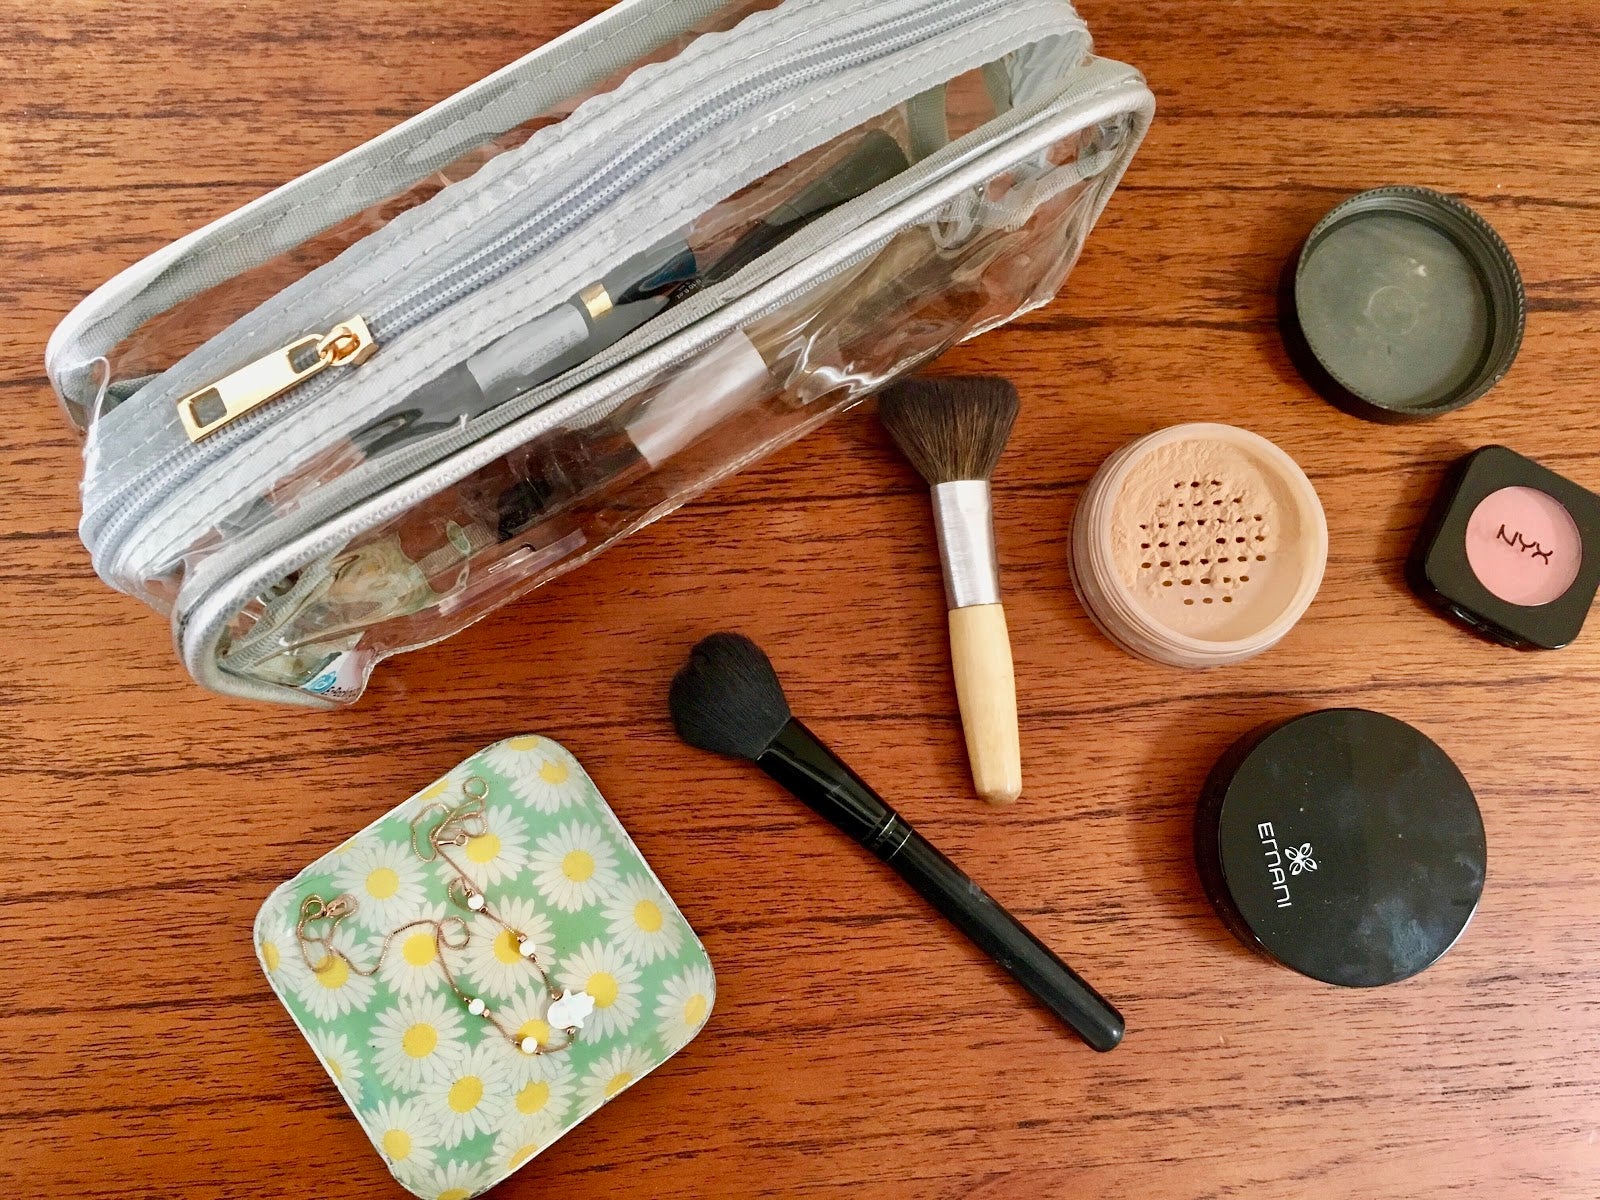 Packing tried and tested makeup tip